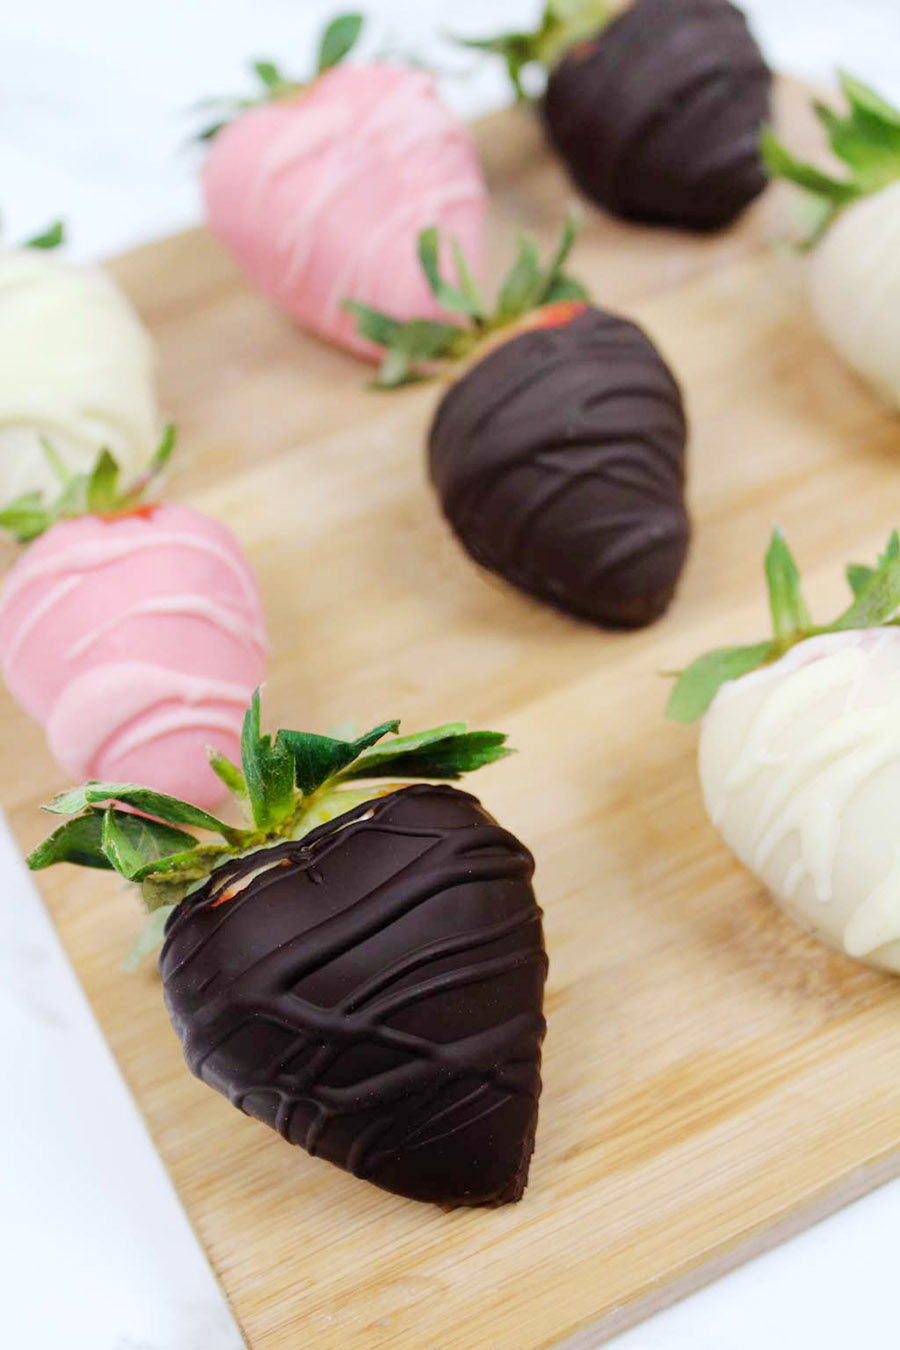 A group of chocolate covered strawberries arranged on a wooden cutting board sitting on a white countertop.